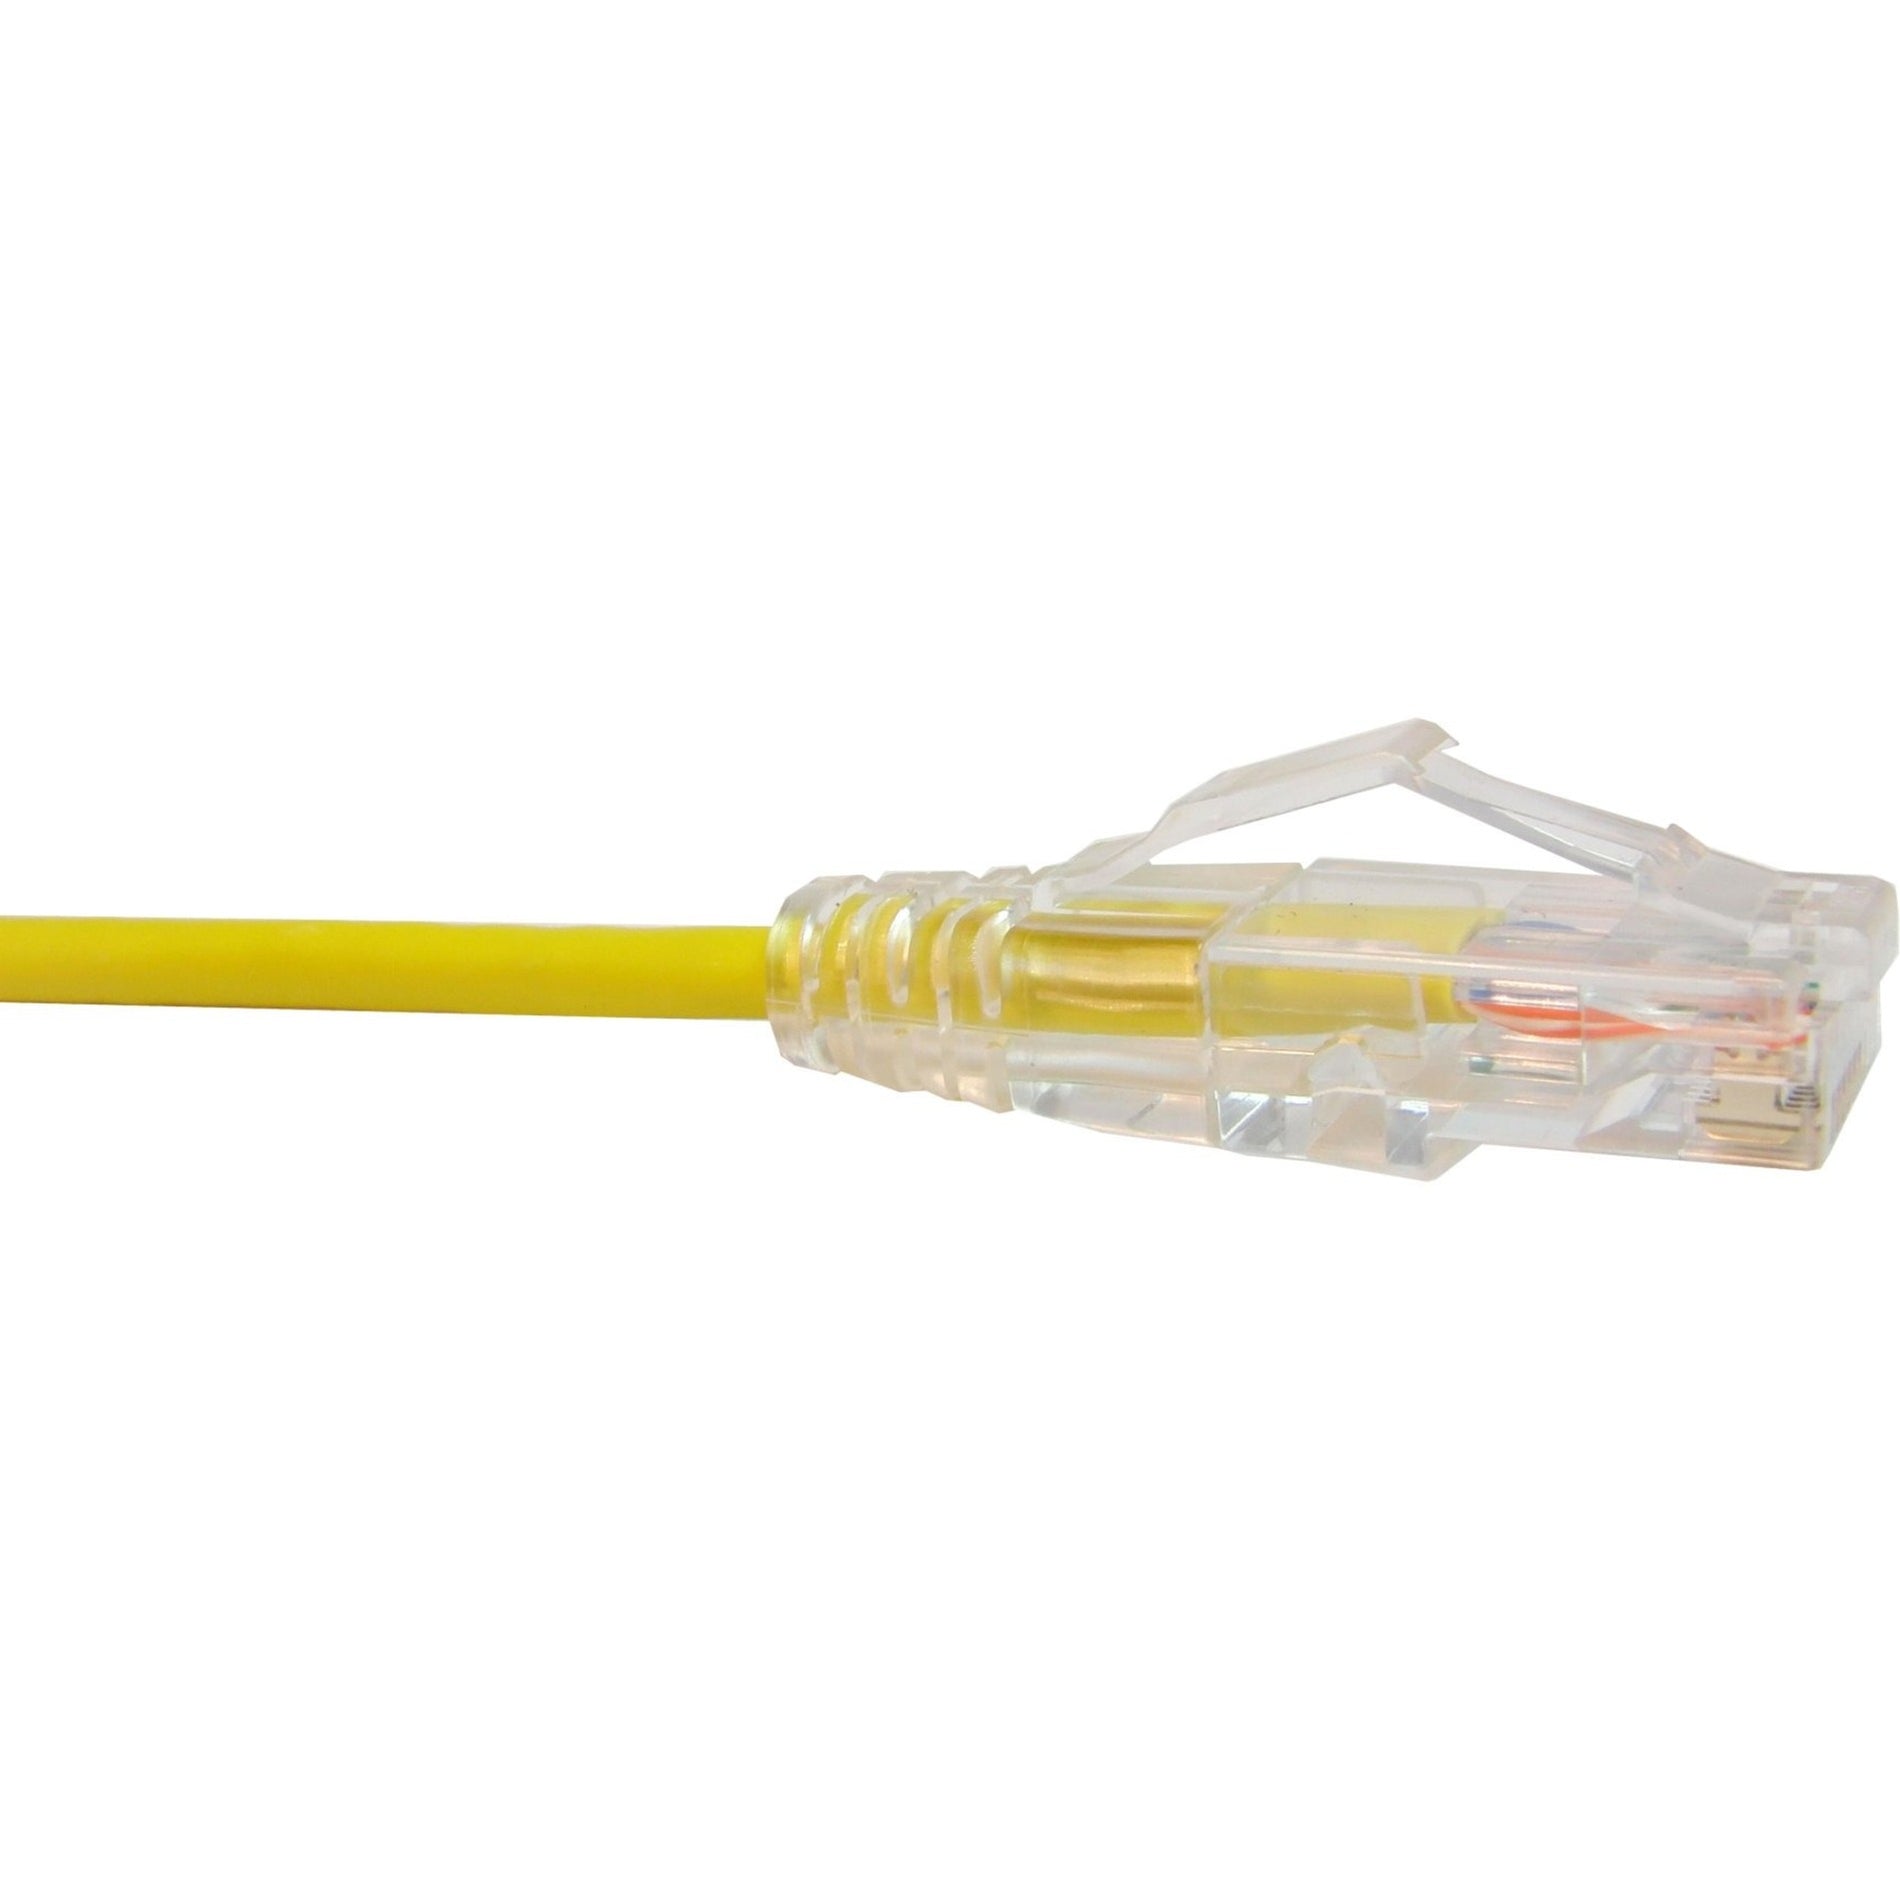 Unirise CS6-01F-YLW Clearfit Slim Cat6 Patch Cable, Snagless, Yellow, 1ft, Network Cable